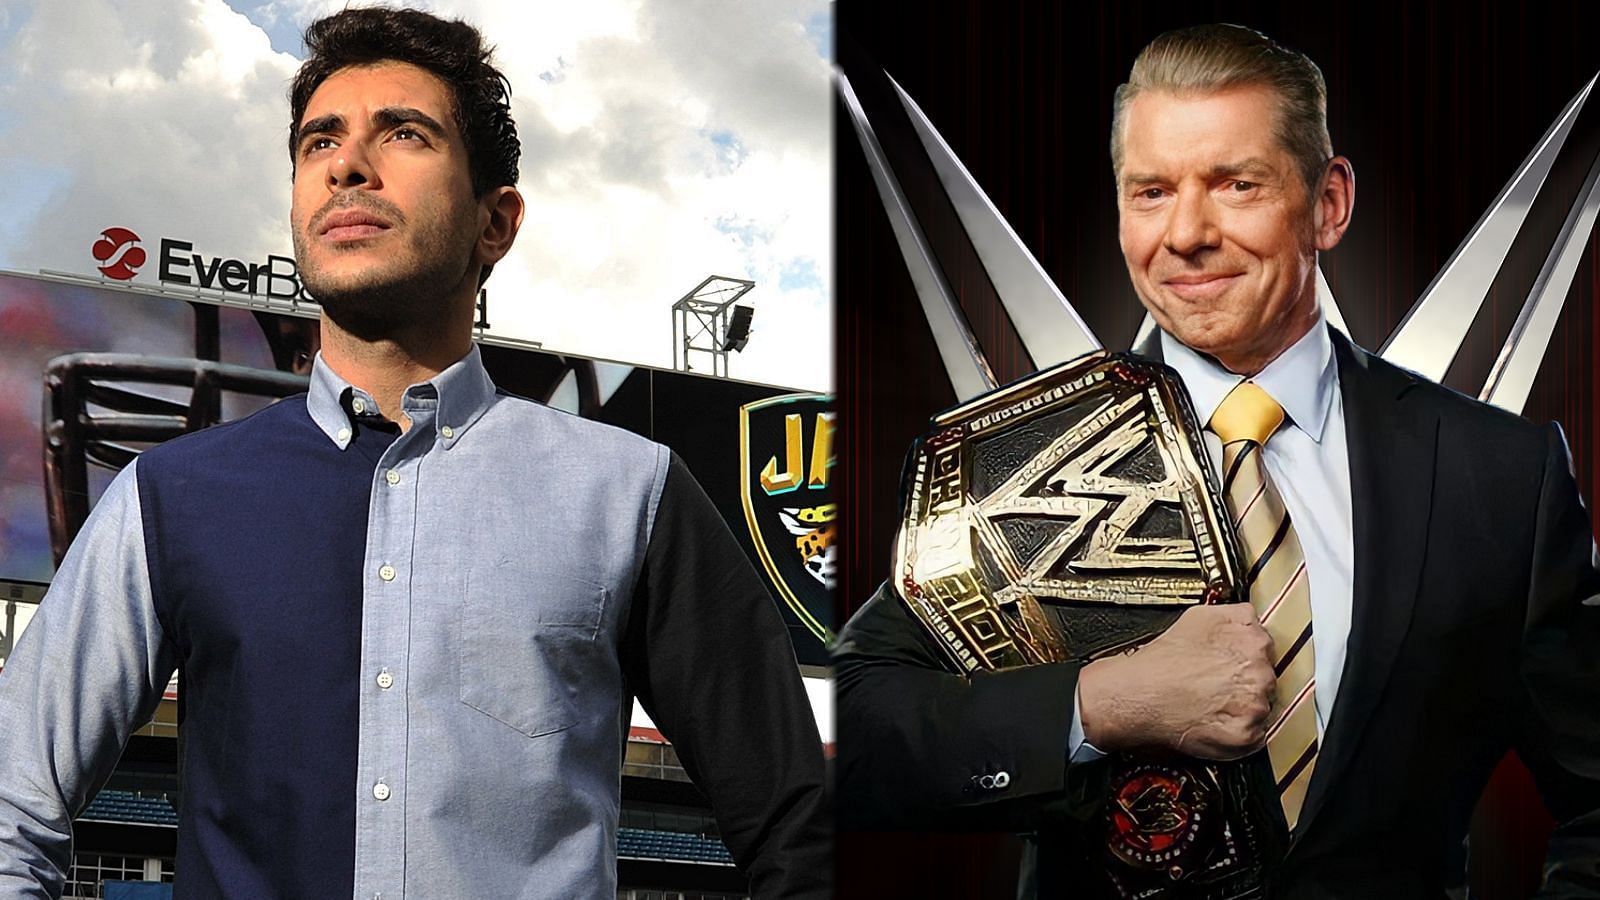 Just how different are Khan and McMahon&#039;s promotions behind the scenes?